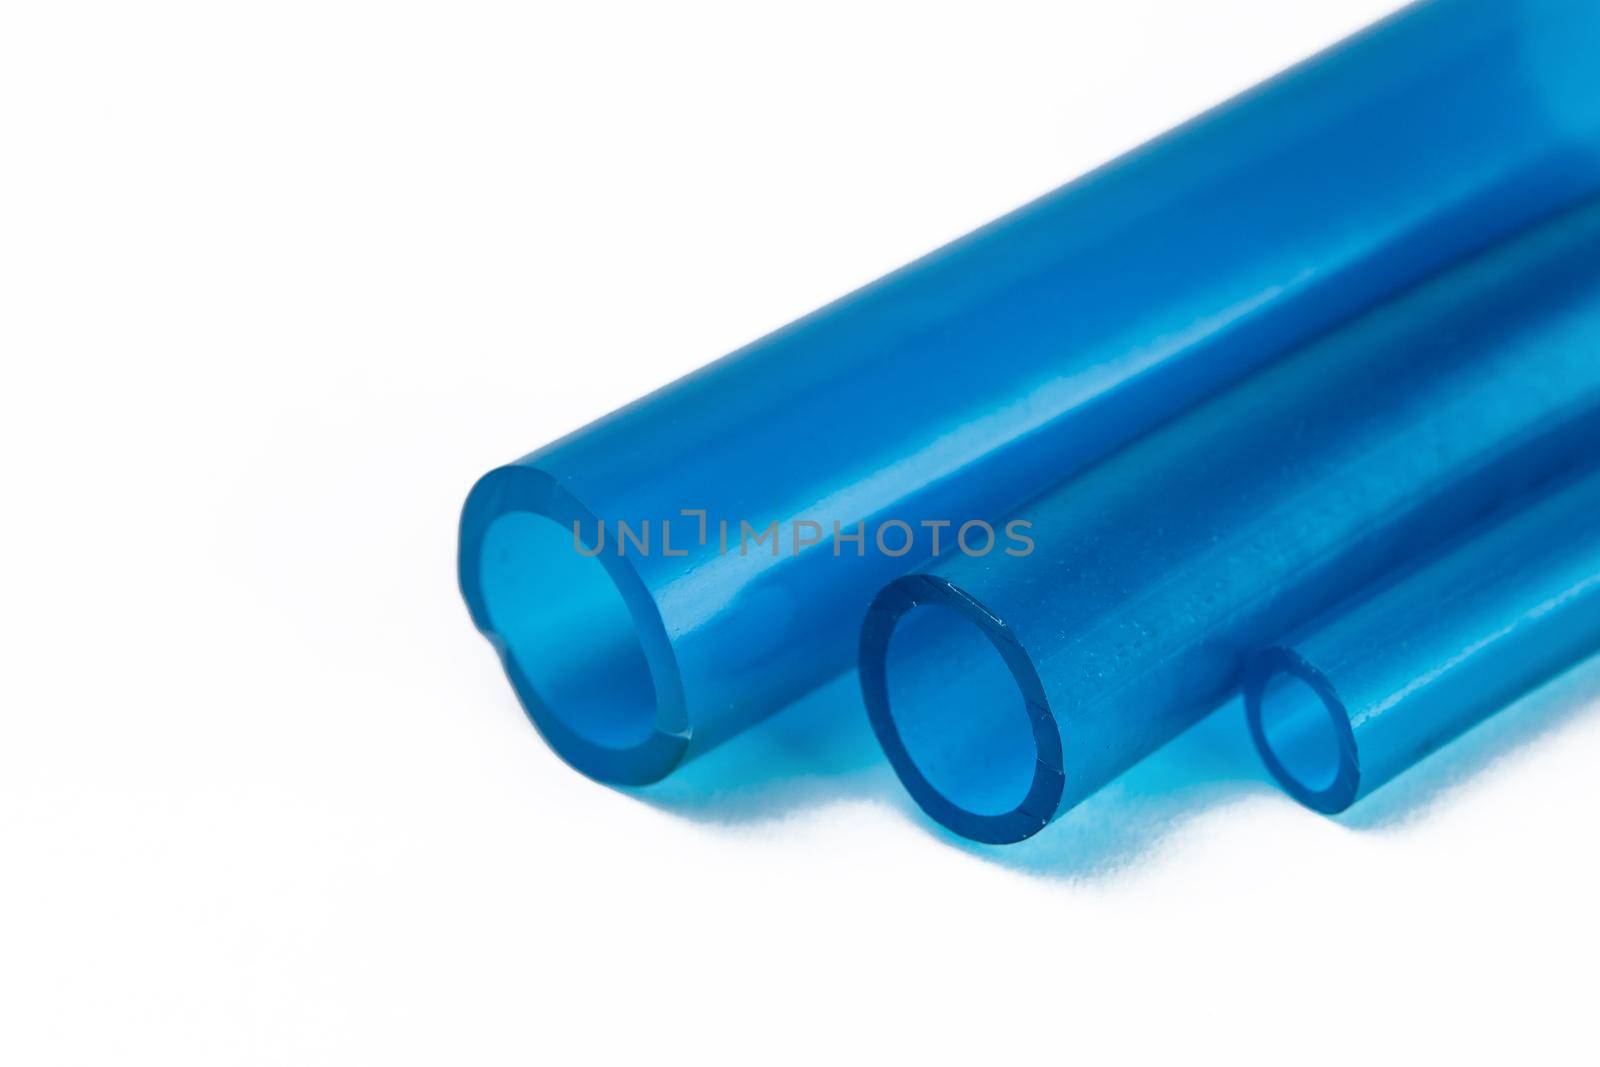 Tips of rubber hoses of different diameters, on a white background.